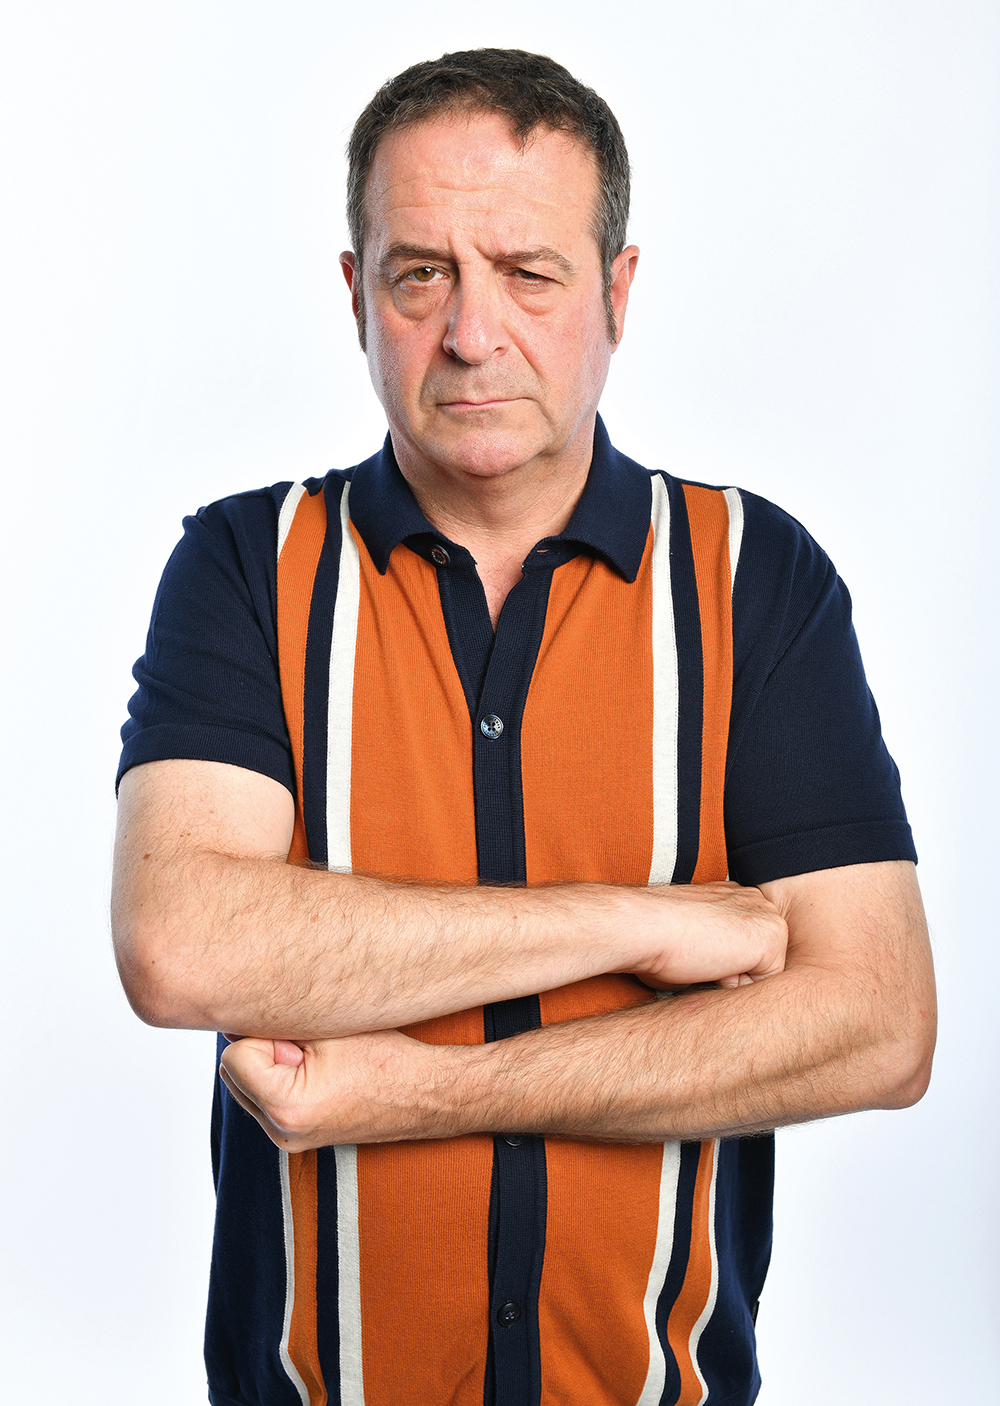 Political comedian Mark Thomas back on tour with new show Hit Refresh